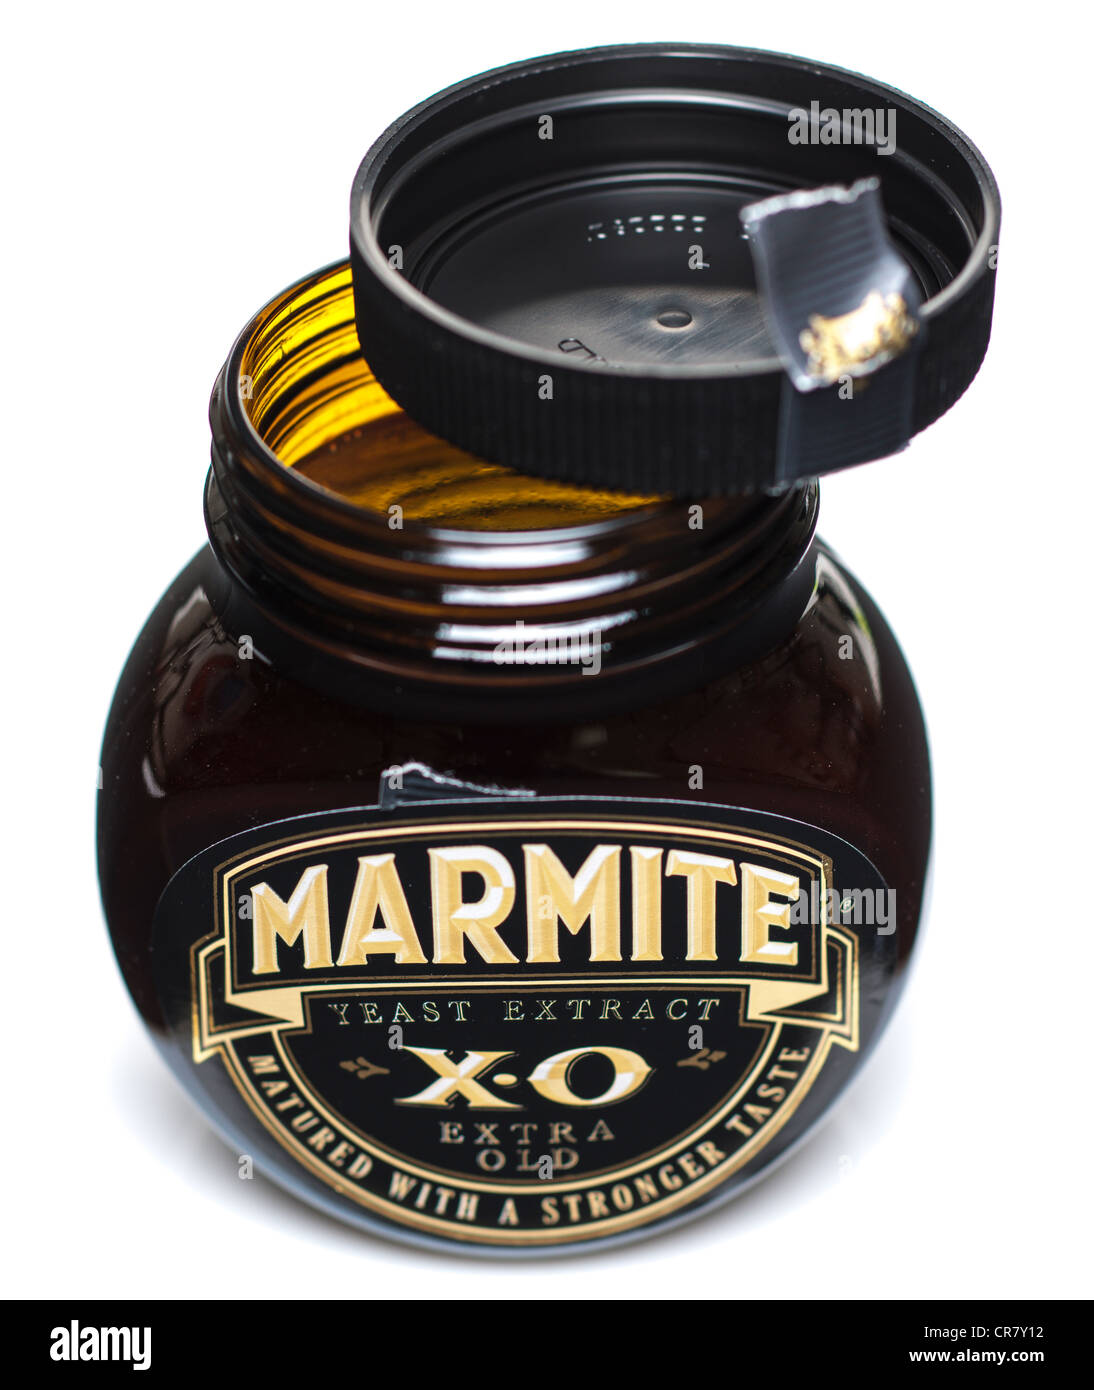 Jar of Marmite X.O extra old matured yeast extract Stock Photo